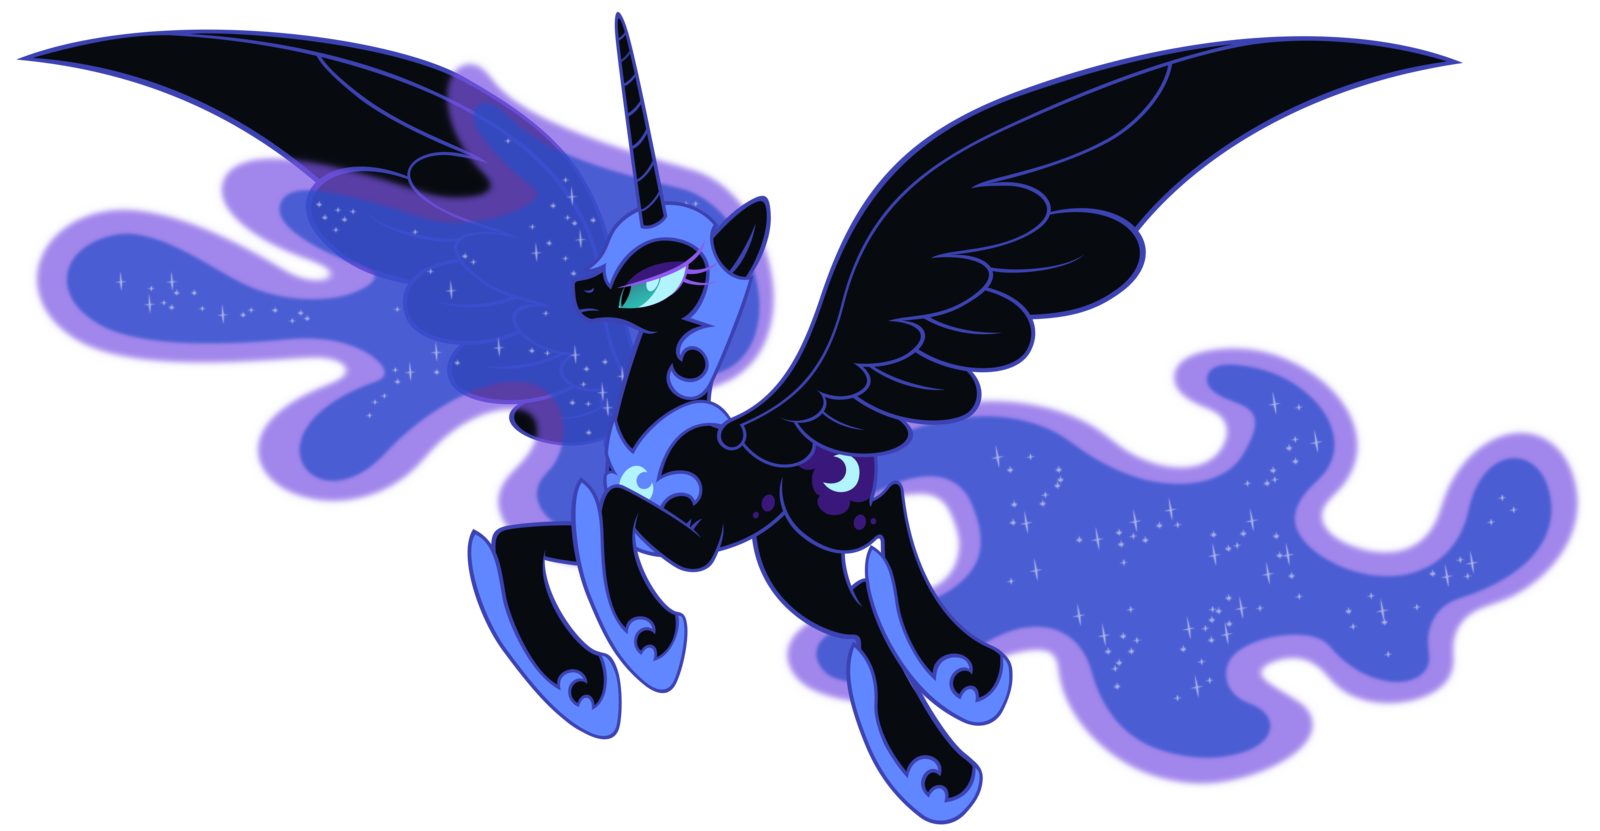 Nightmare Moon by Stabzor on